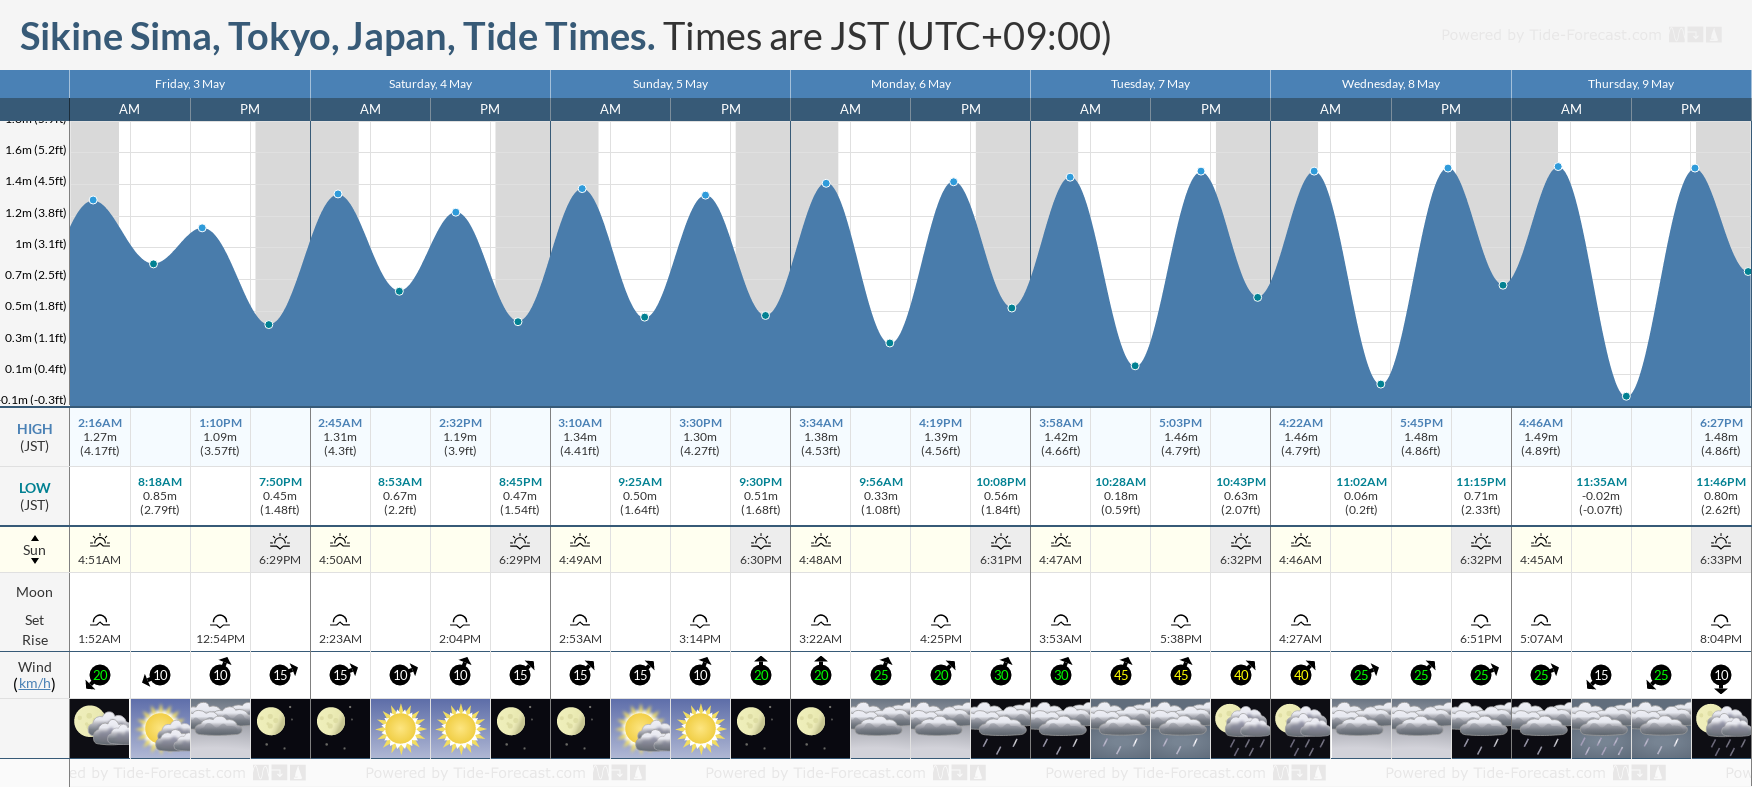 Sikine Sima, Tokyo, Japan Tide Chart including high and low tide tide times for the next 7 days